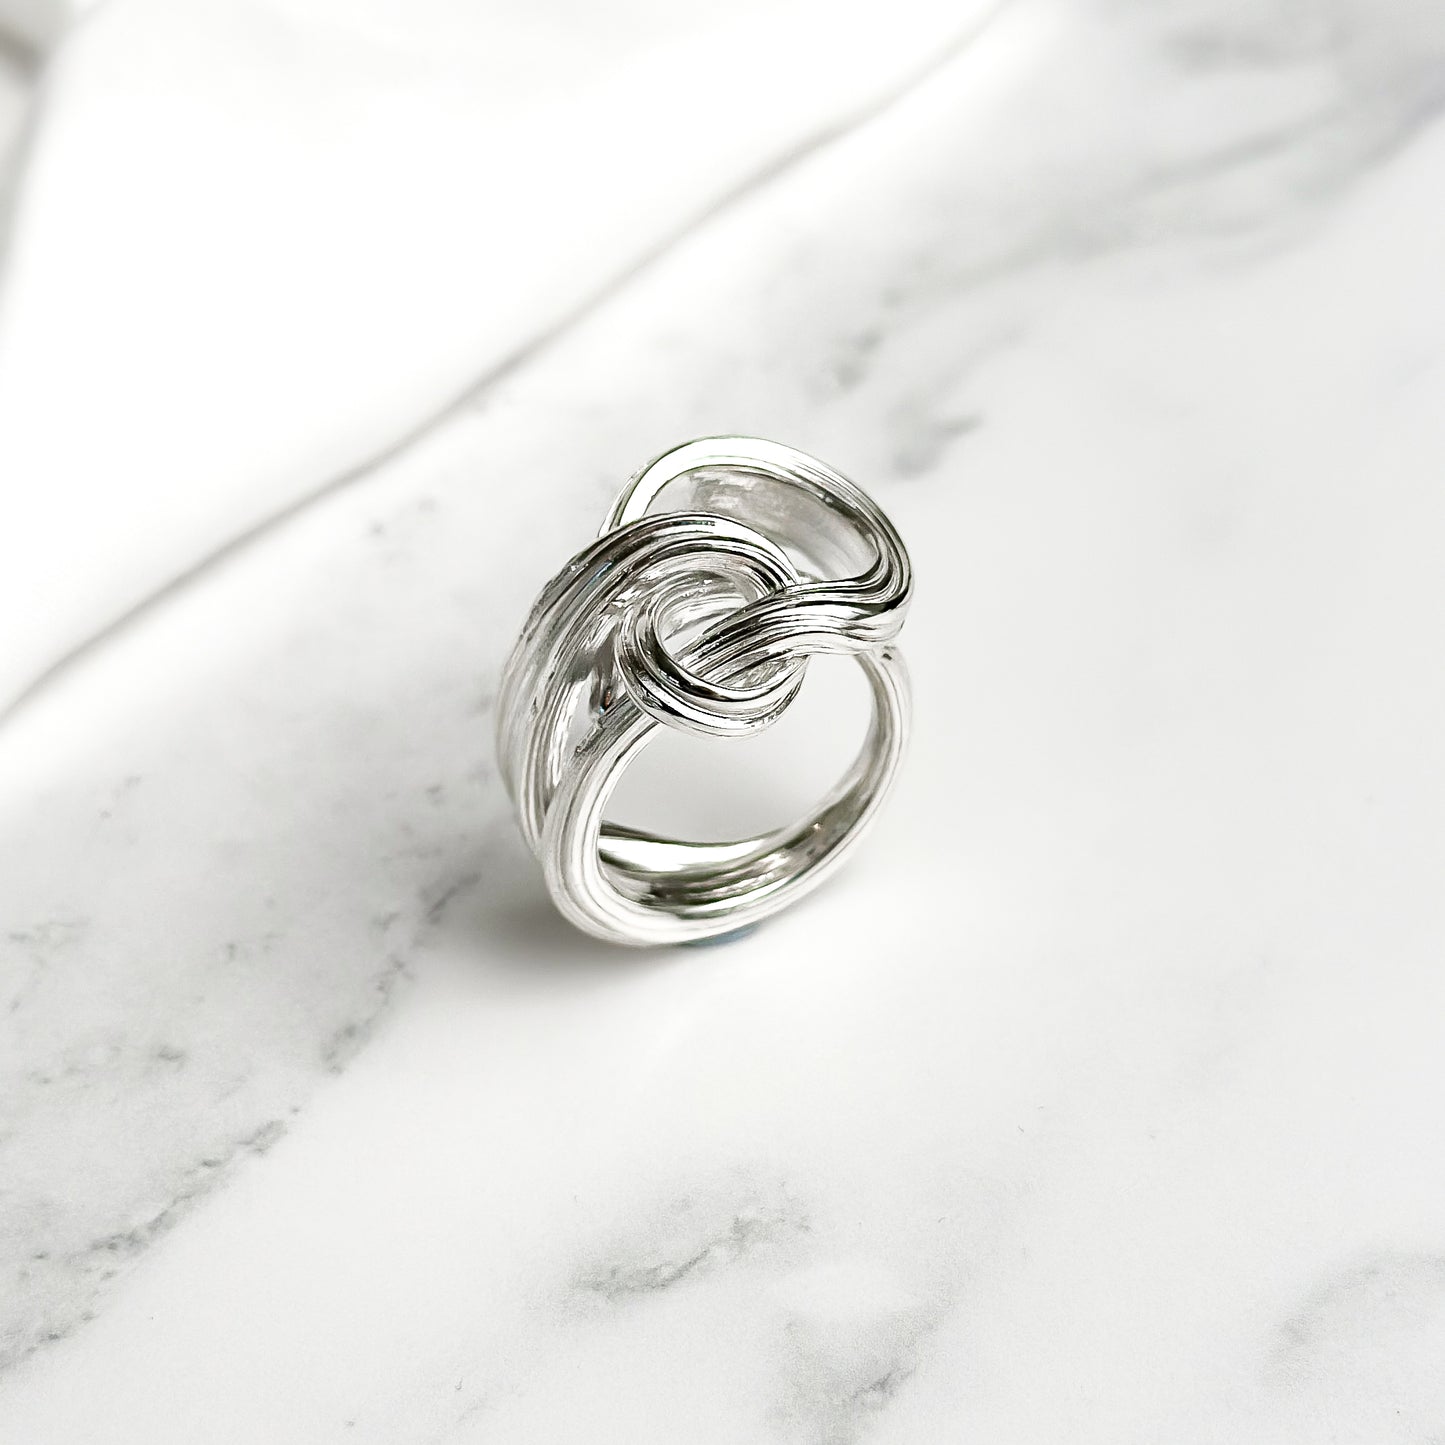 One of a kind Drift Sterling Silver Ring - Size M